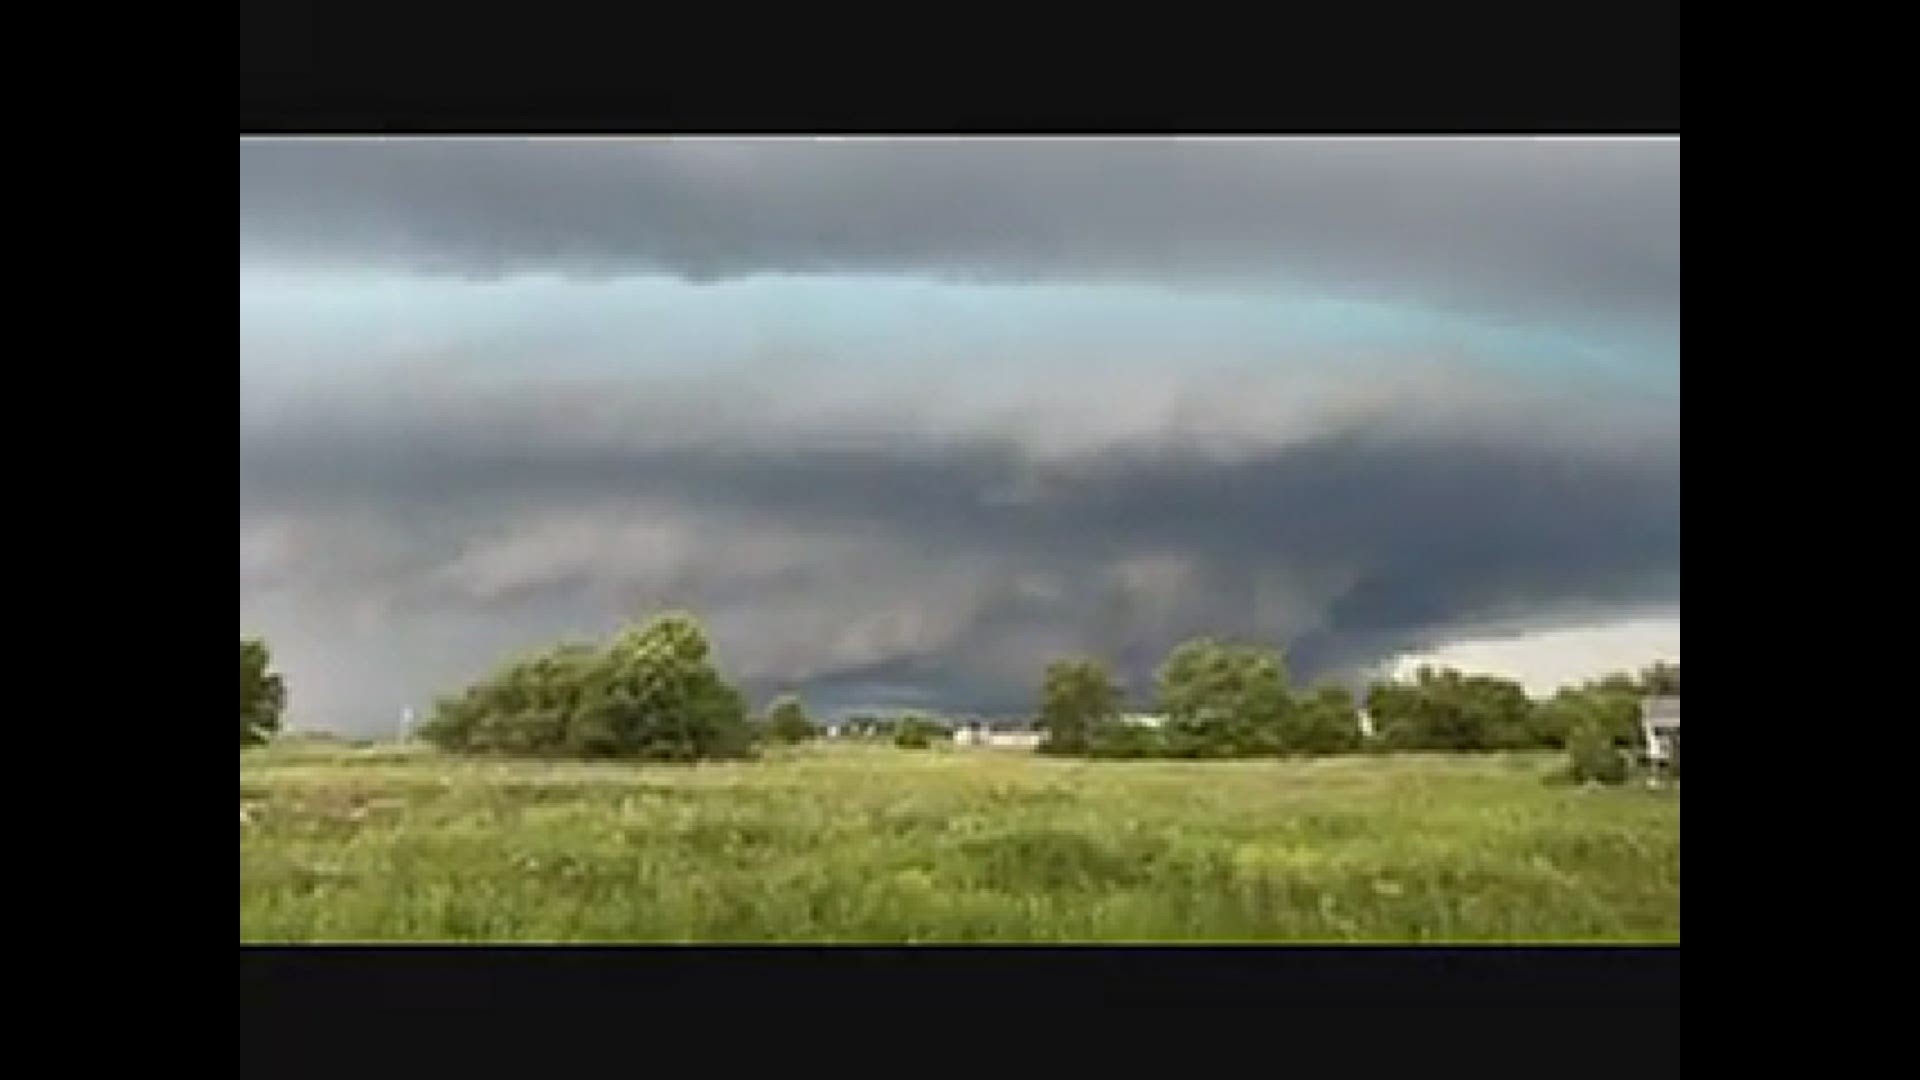 Iowa severe weather forecast shows tornadoes, wind, hail possible